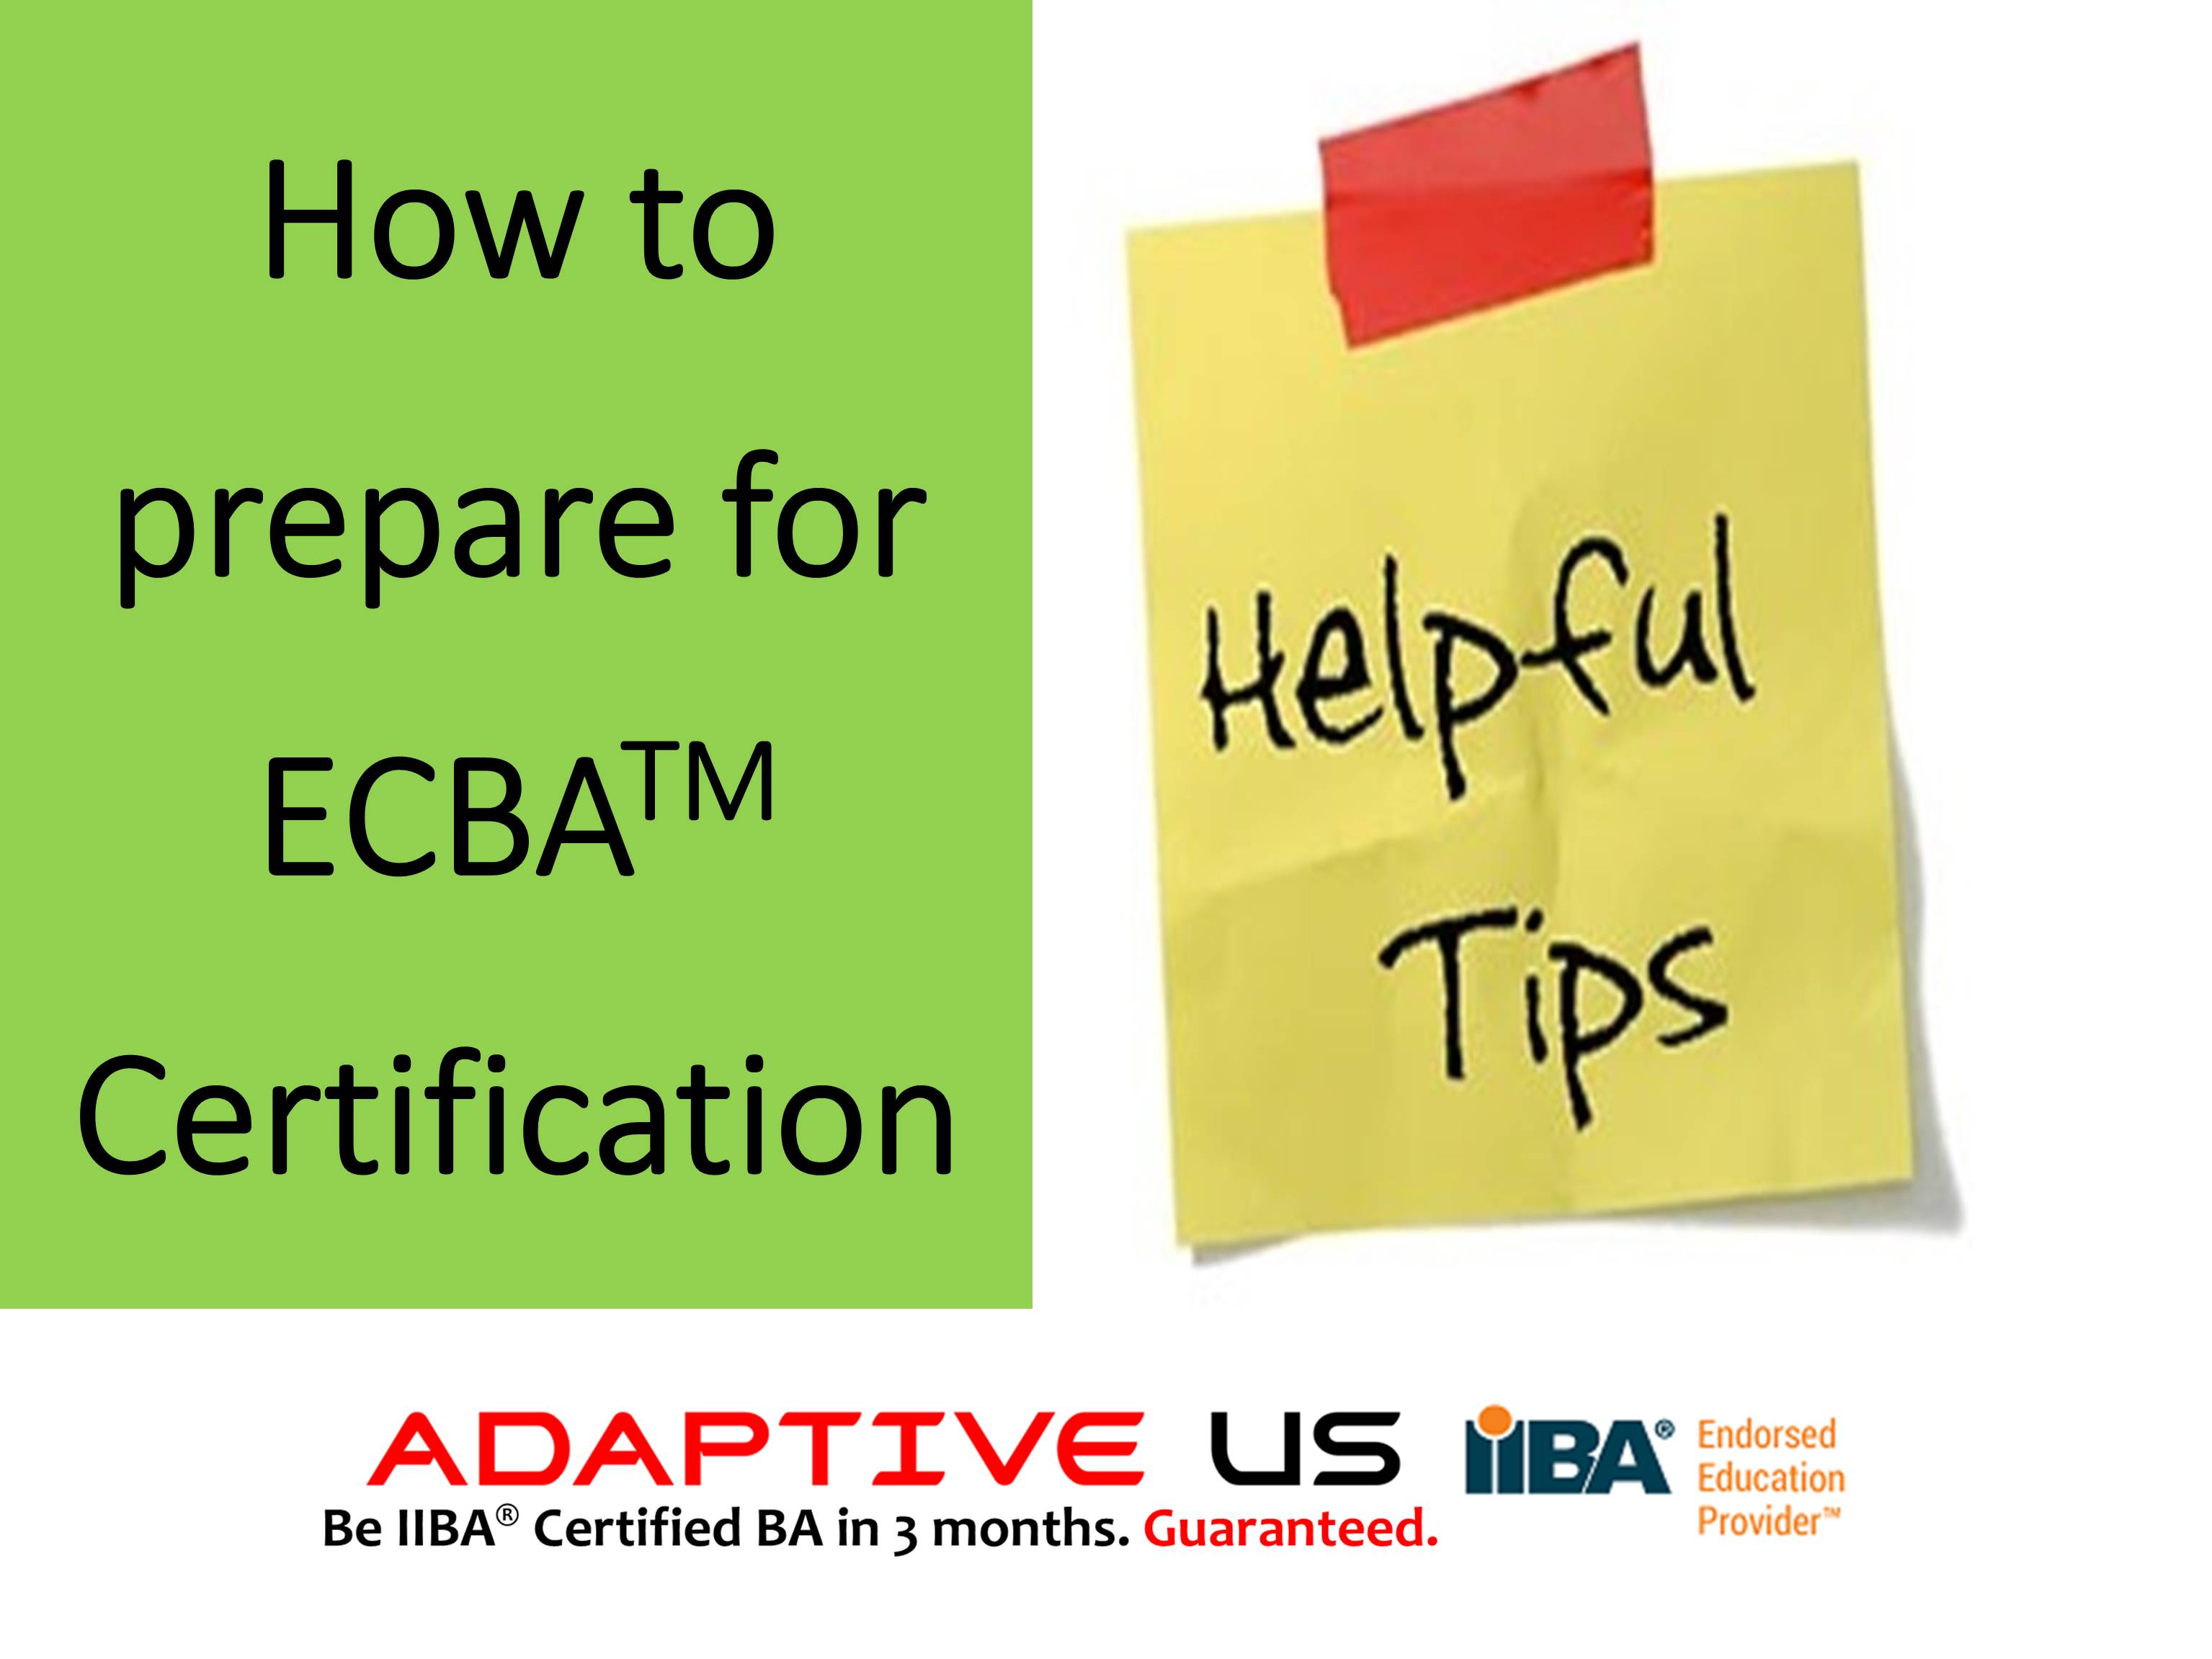 How to Prepare for ECBA Certification from IIBA